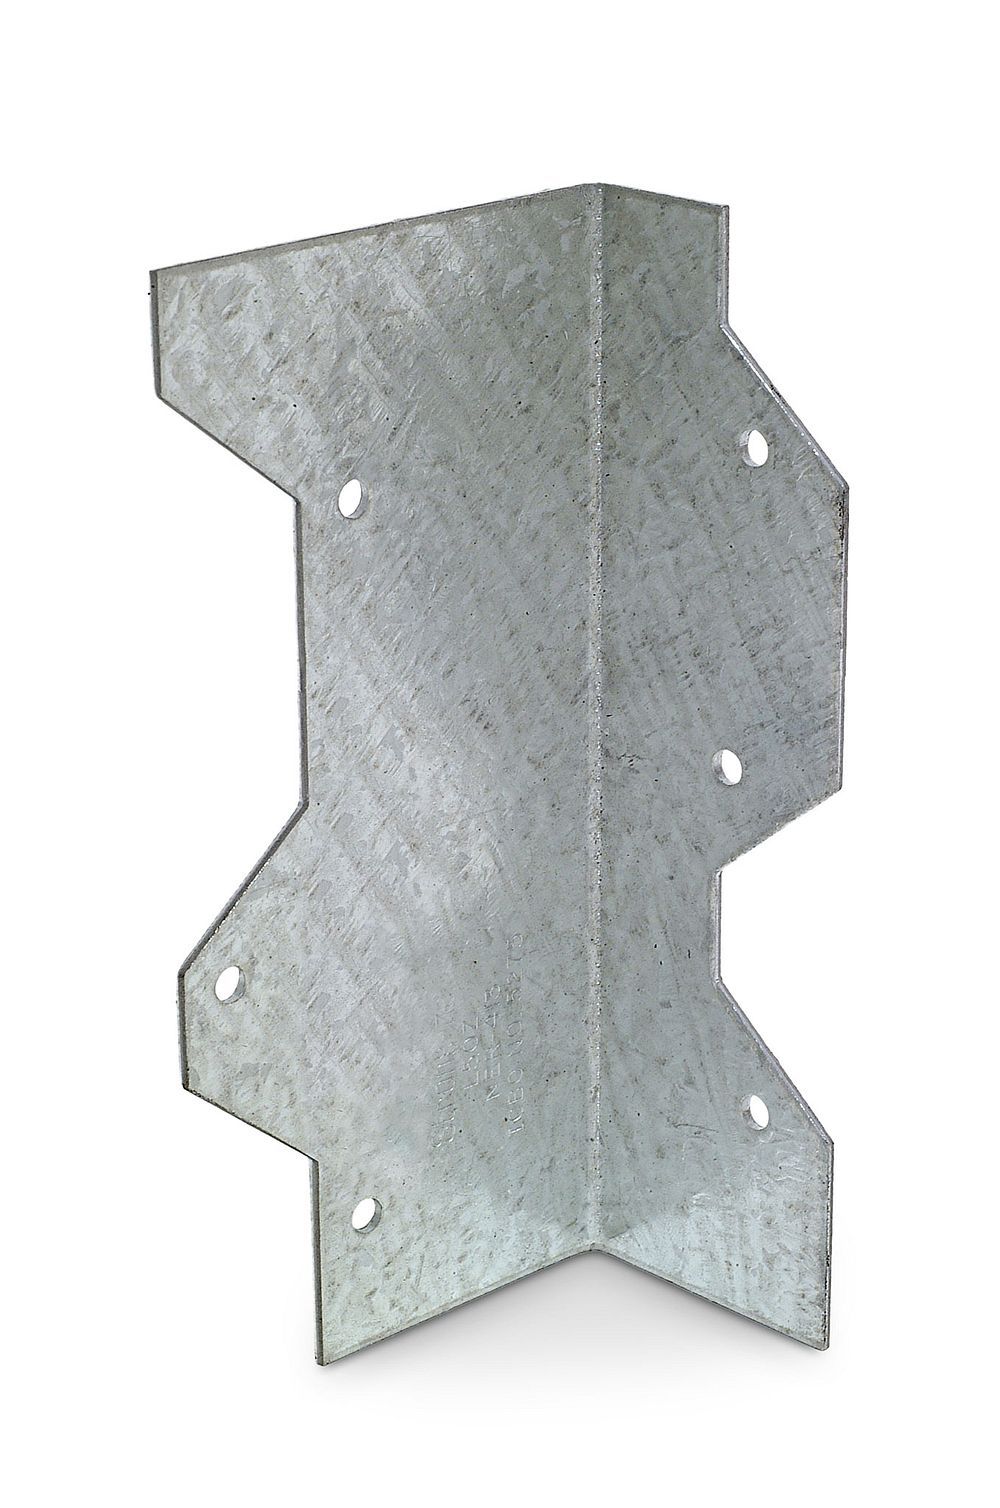 Simpson Strong-Tie L50Z 5" Reinforcing Angle - Zmax Finish